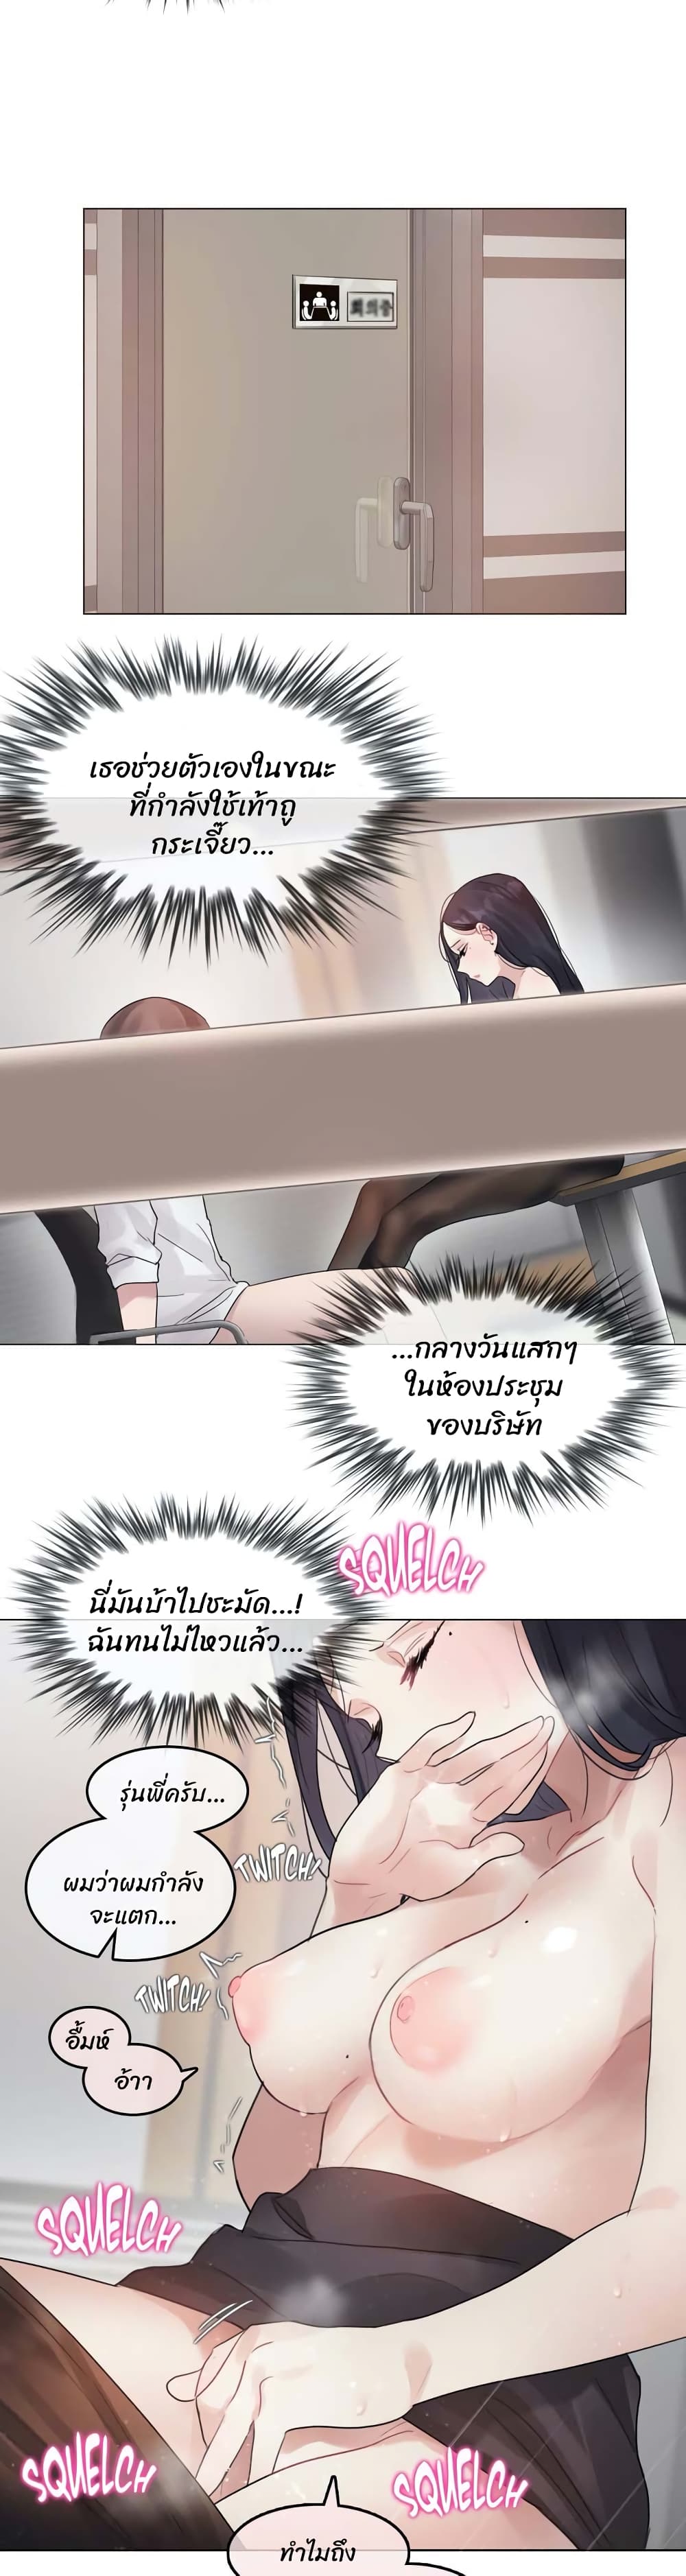 A Pervert's Daily Life 97 15